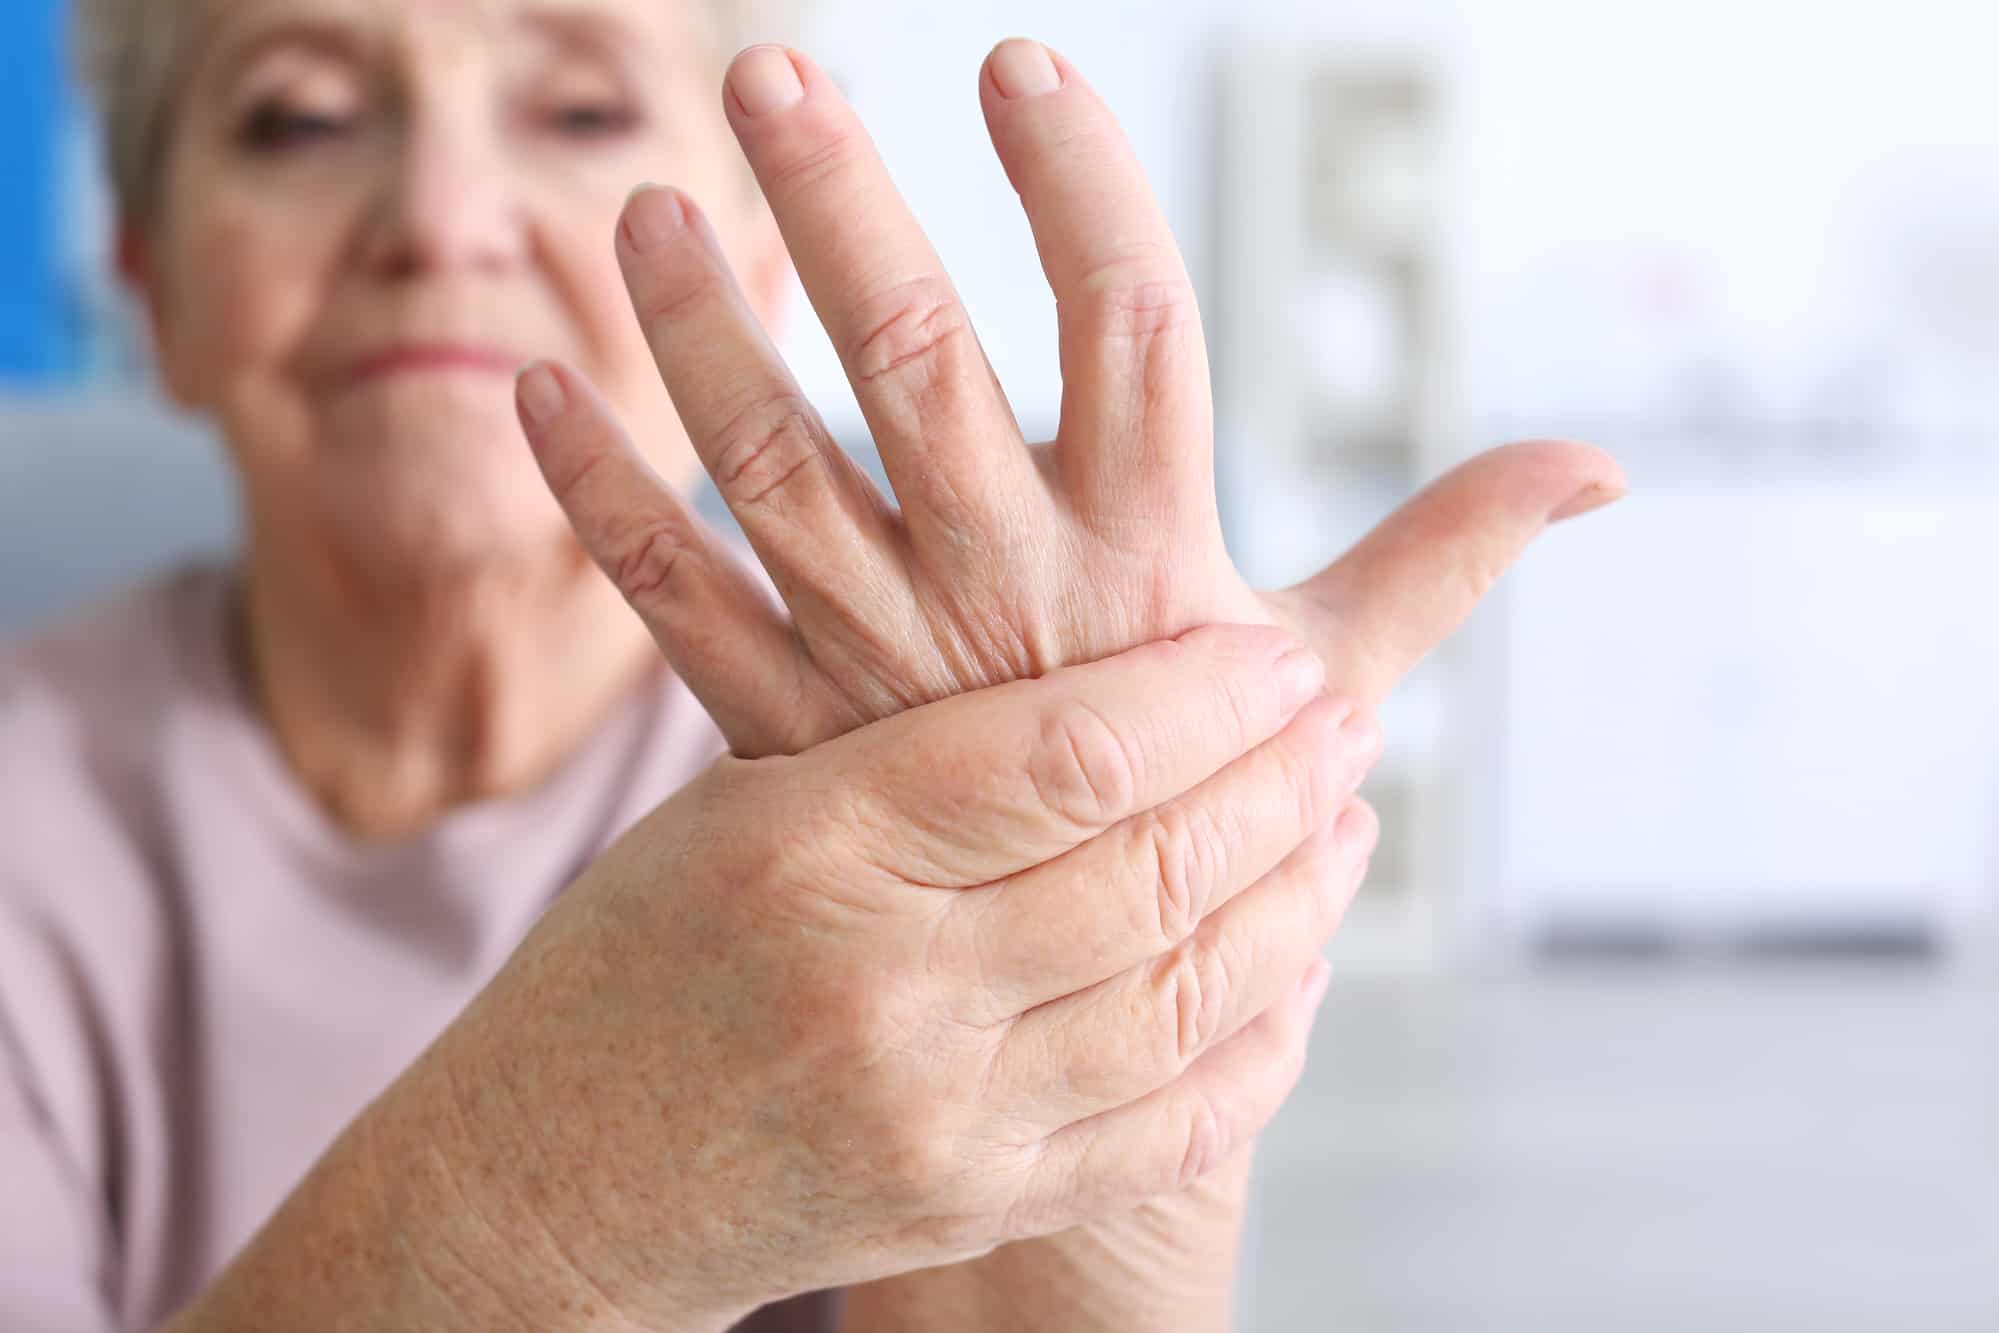 What Exactly Is Arthritis, And Can I Get Help?